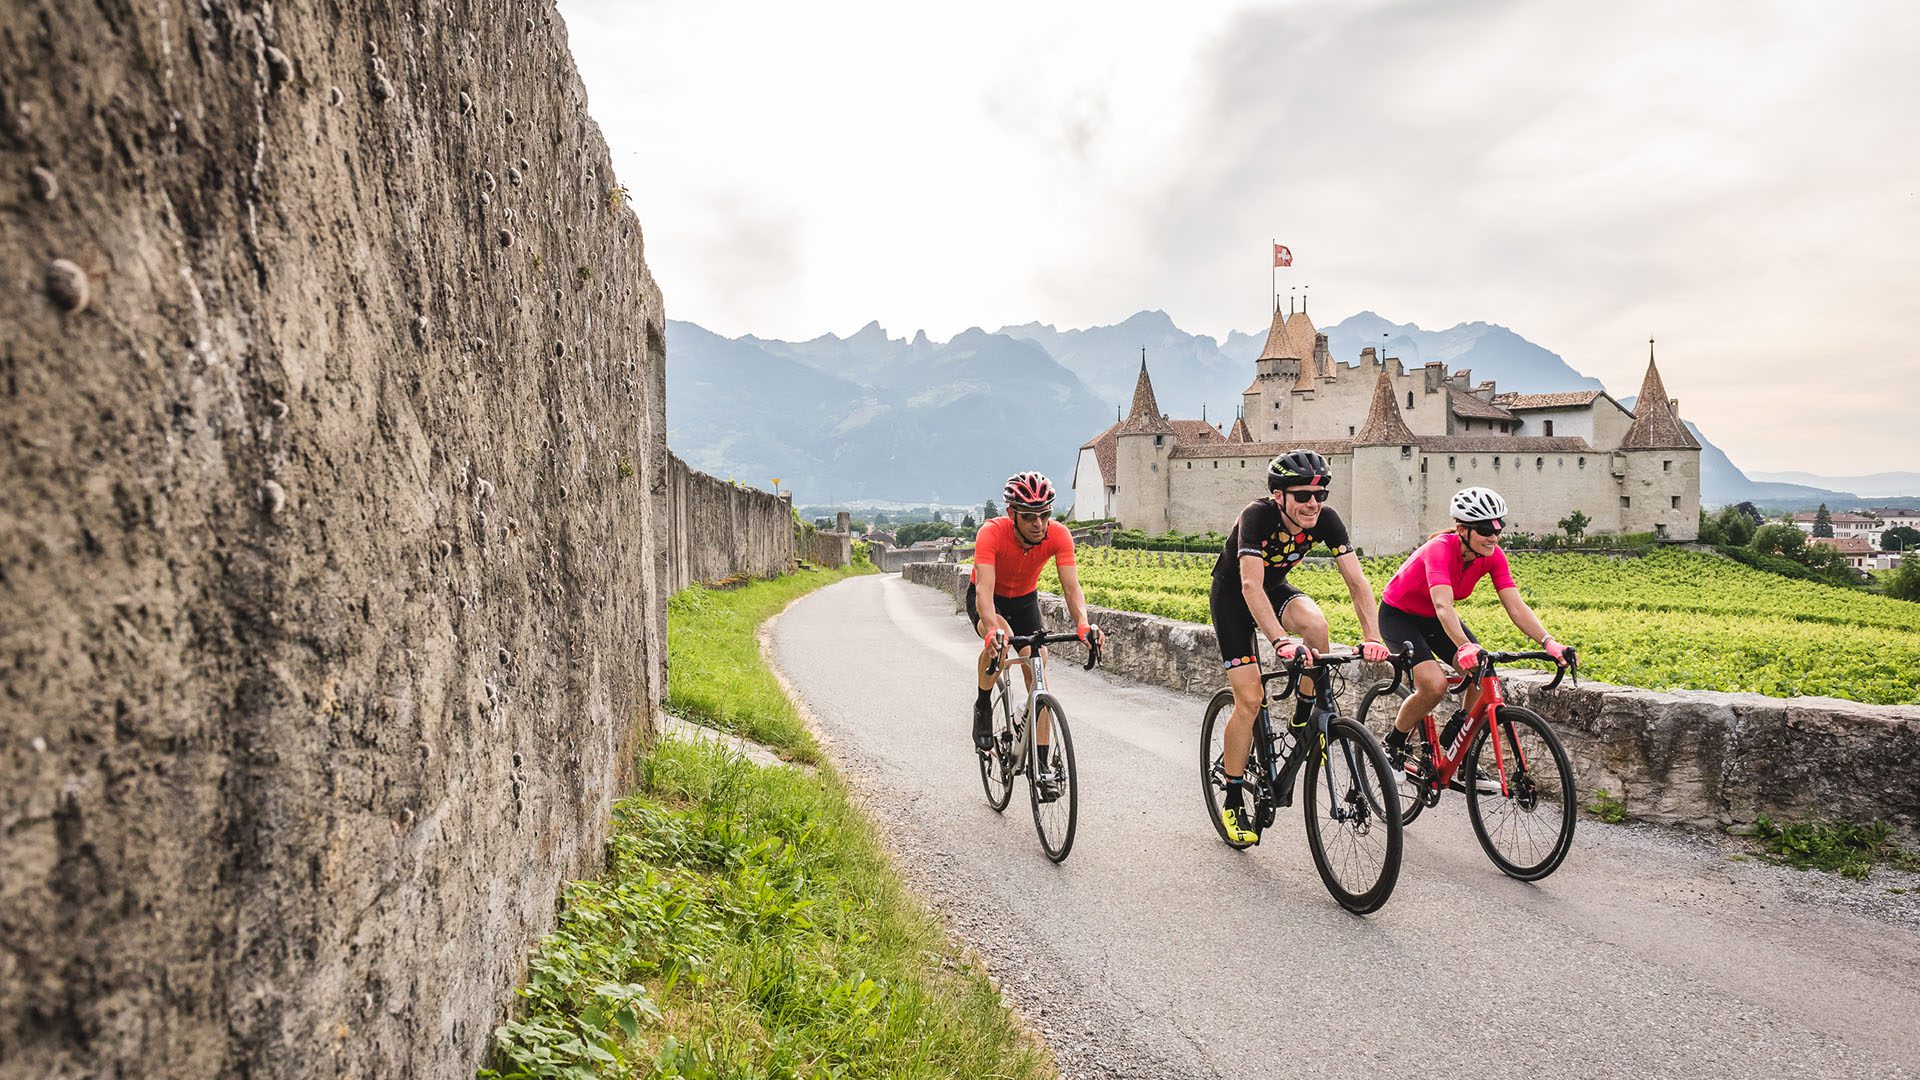 Bike, Hike And Explore Your Way Through An Unforgettable Summer Holiday In The Vaud Region